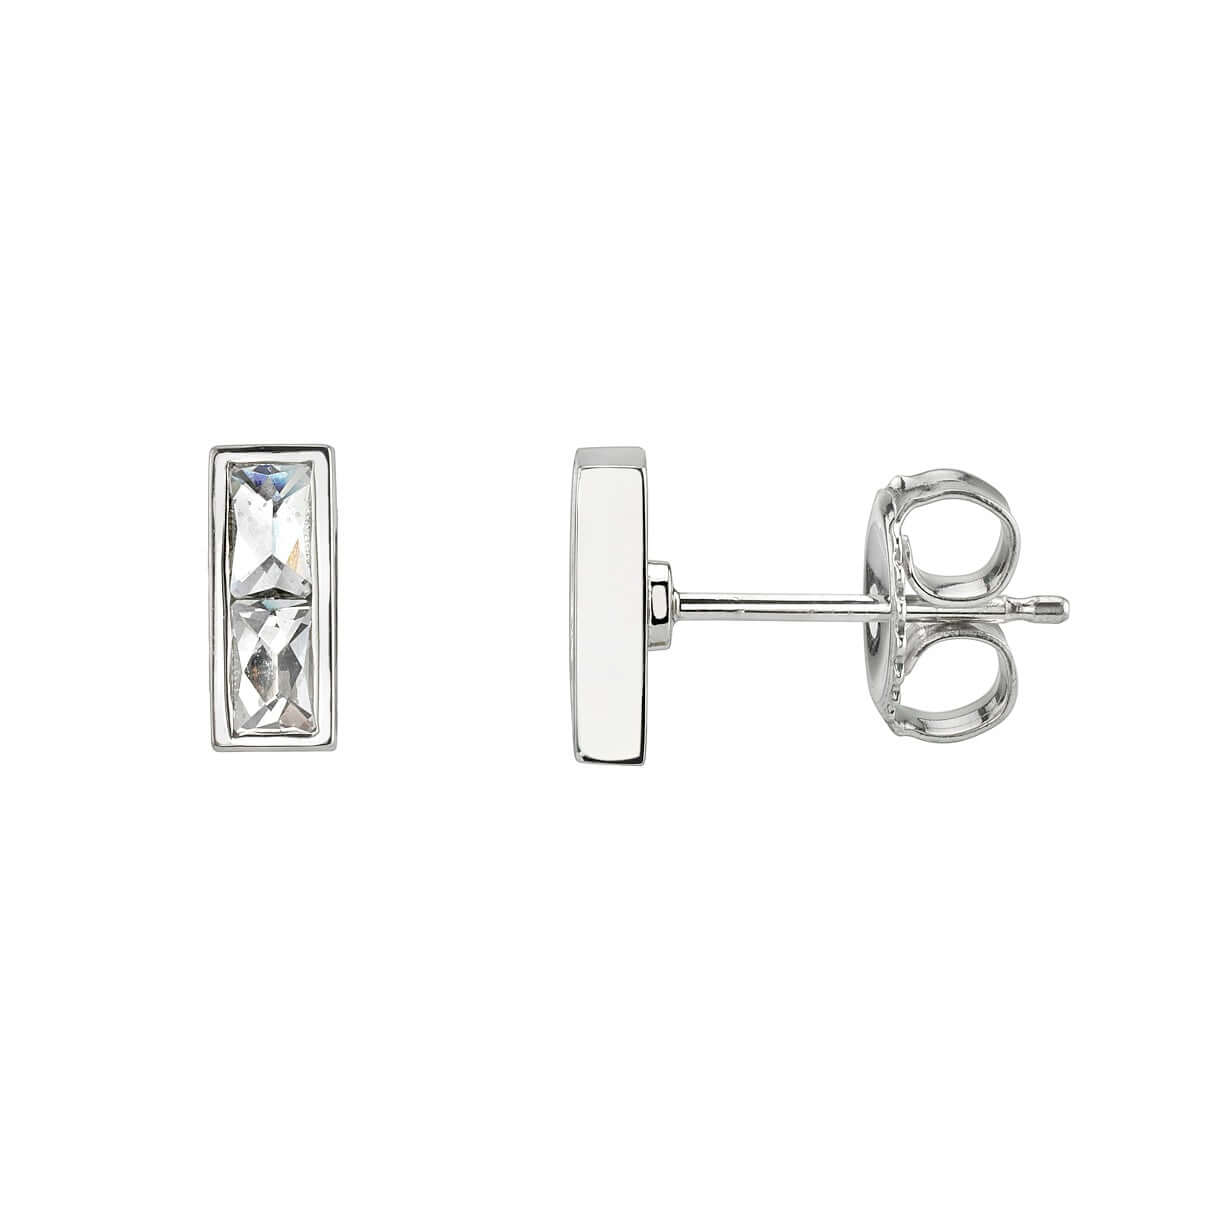 SINGLE STONE MONET STUDS | Earrings featuring Approximately 0.50ctw GH/VS French cut diamonds set in handcrafted bar stud earrings.